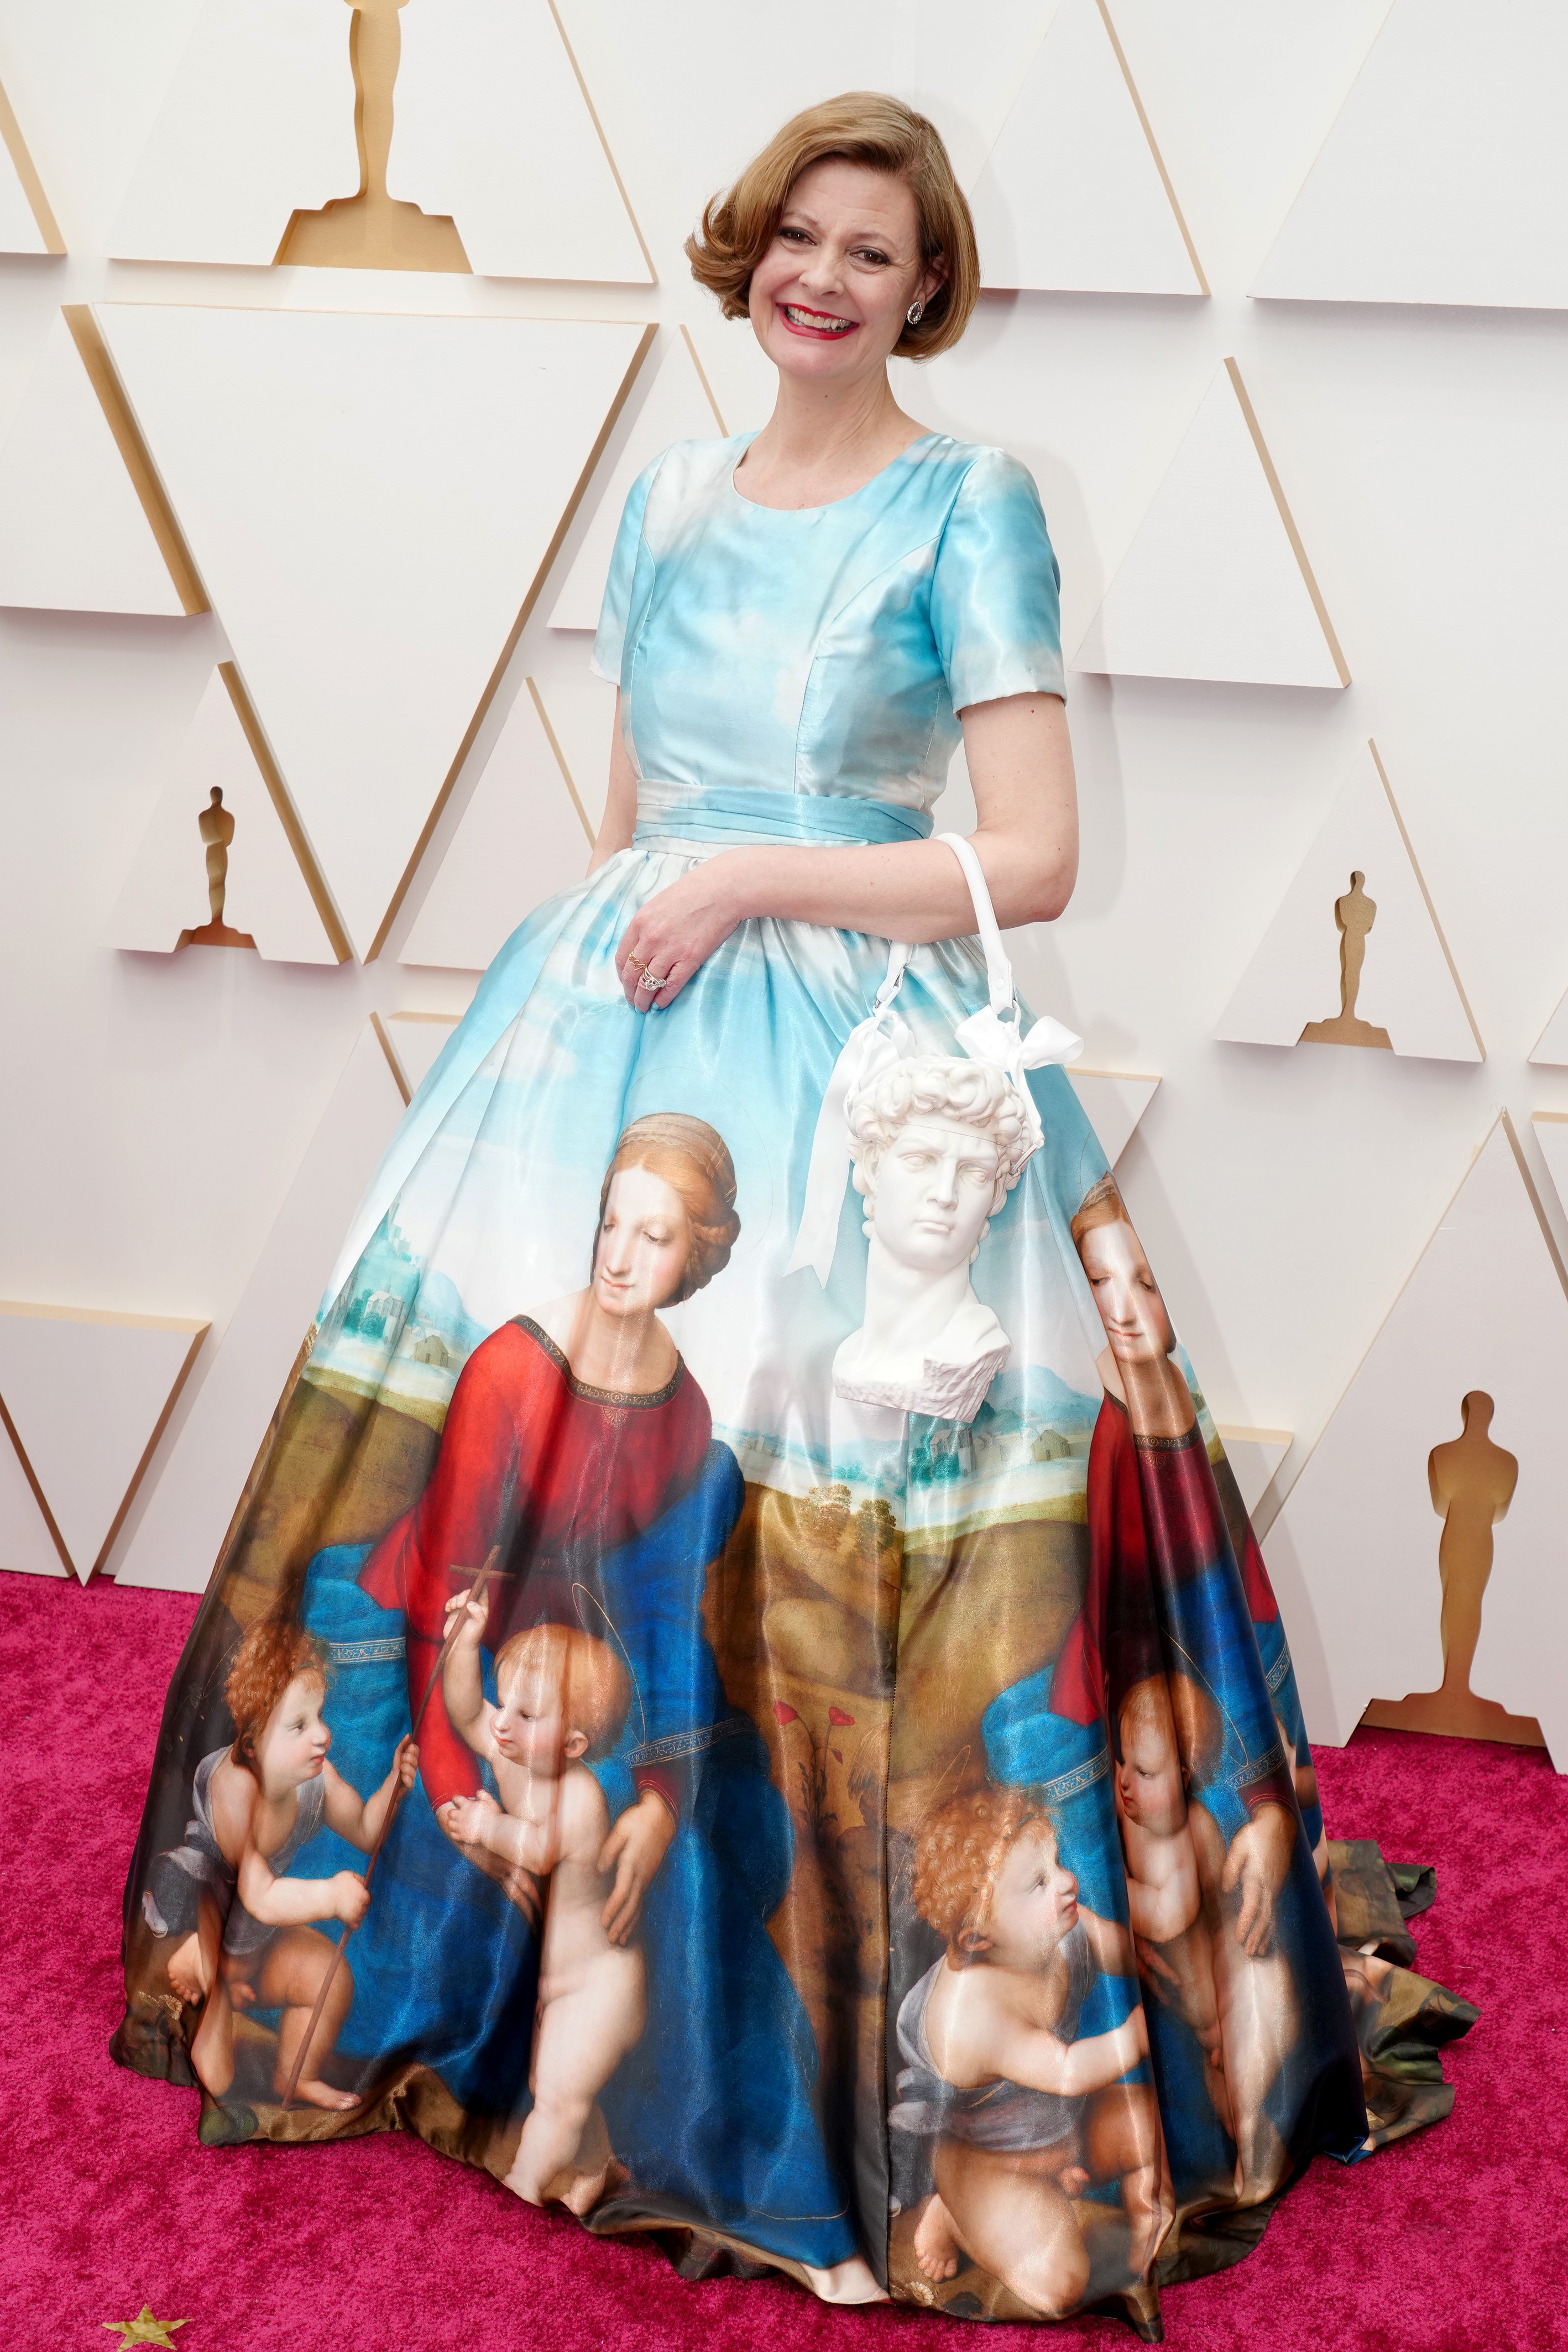 HOLLYWOOD, CALIFORNIA - MARCH 27: Eva Von Bahr attends the 94th Annual Academy Awards at Hollywood and Highland on March 27, 2022 in Hollywood, California. (Photo by Jeff Kravitz/FilmMagic) (Foto: FilmMagic)